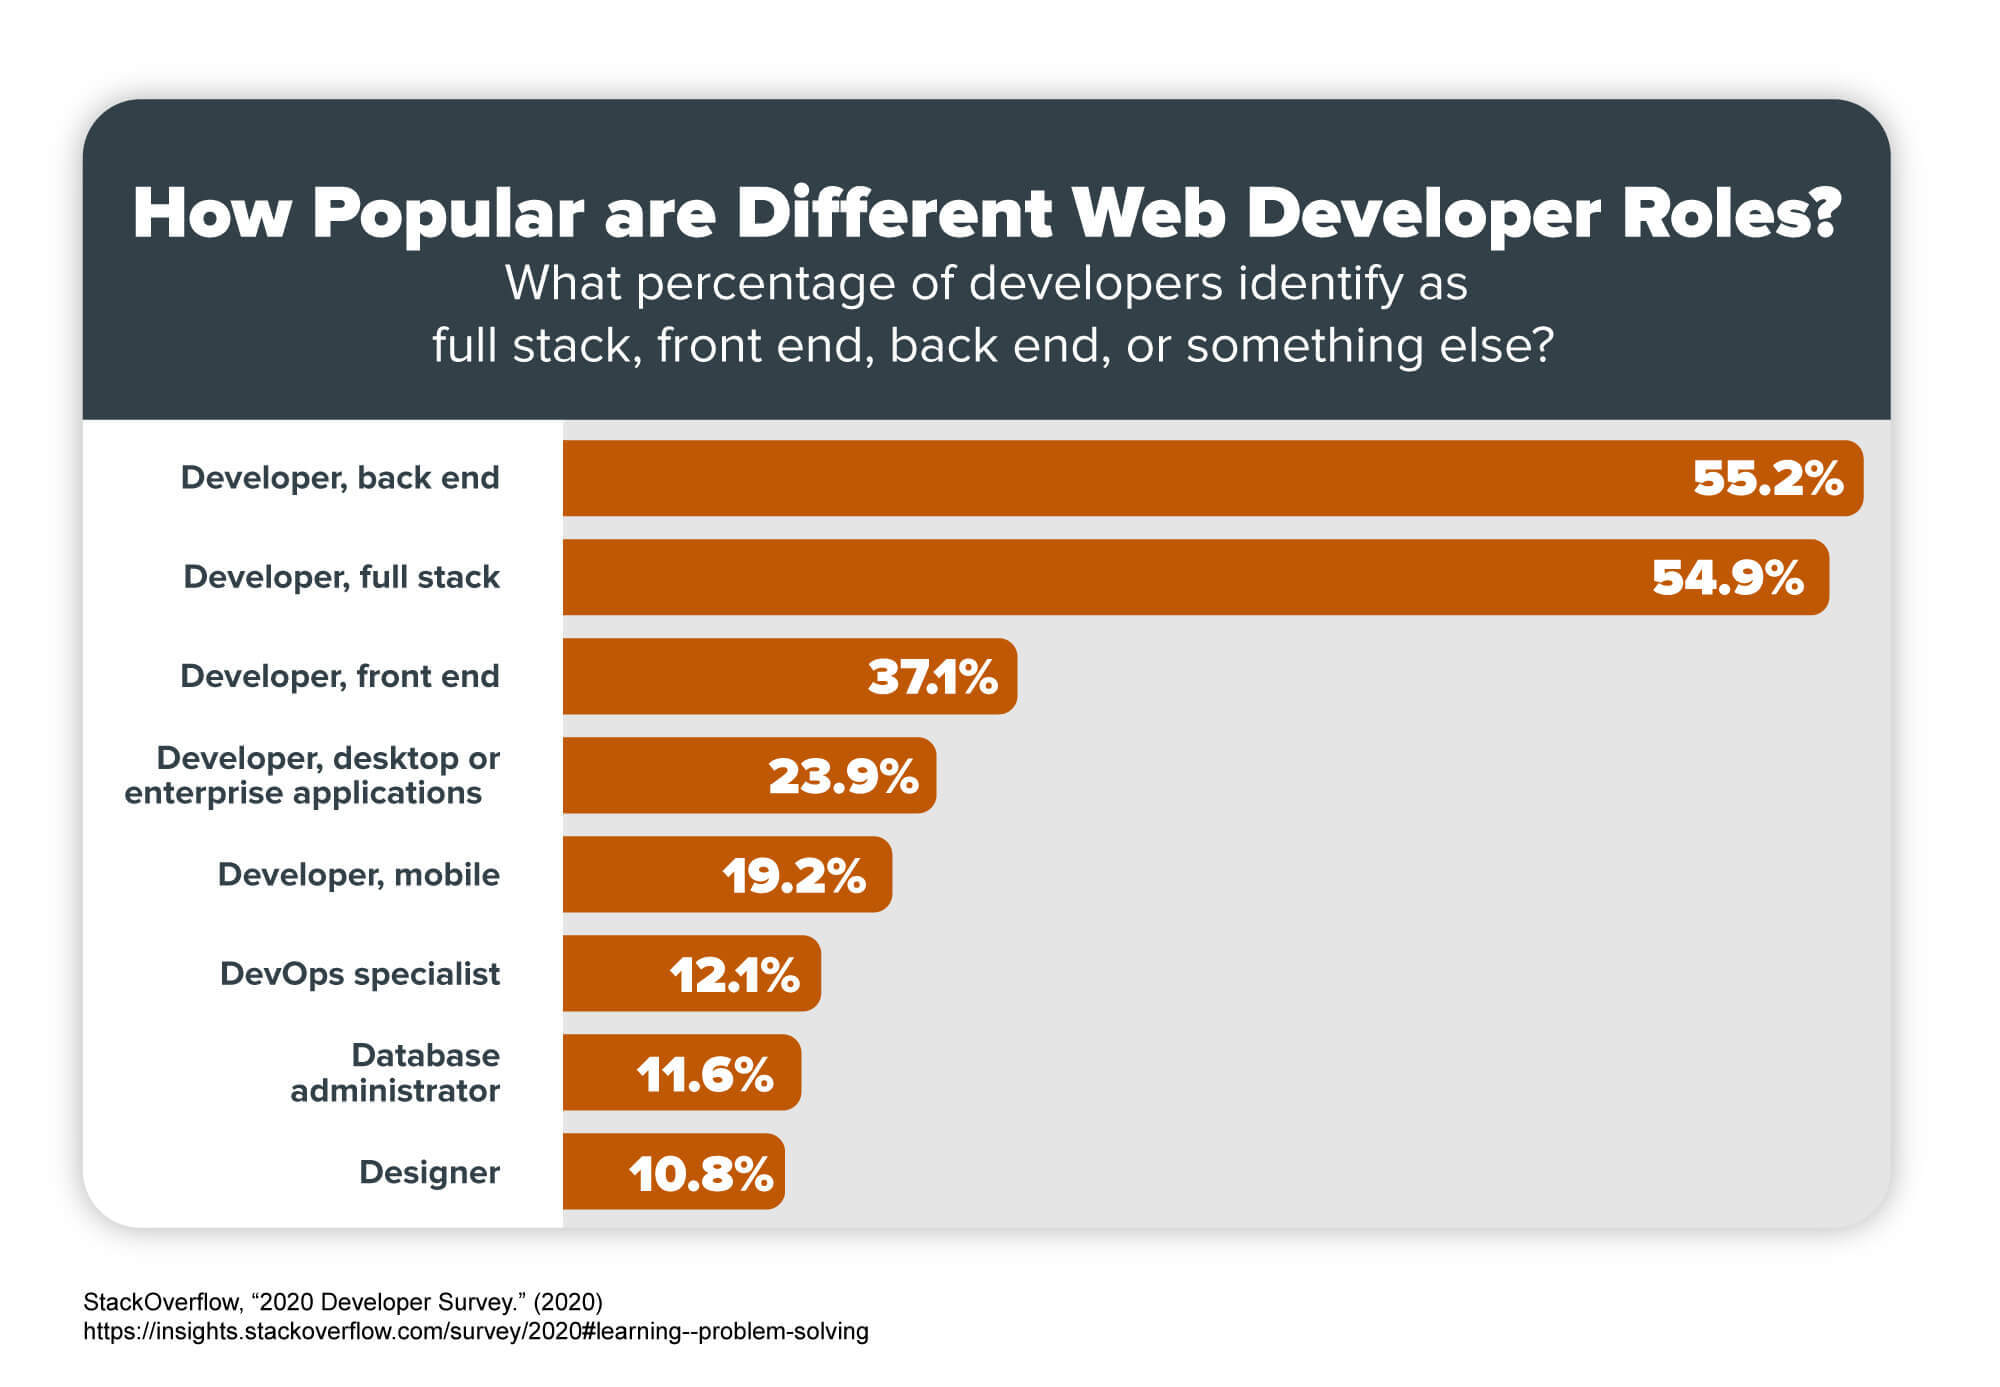 A chart that shows the percentage of developers who identify as full stack, front end, back end, or something else.